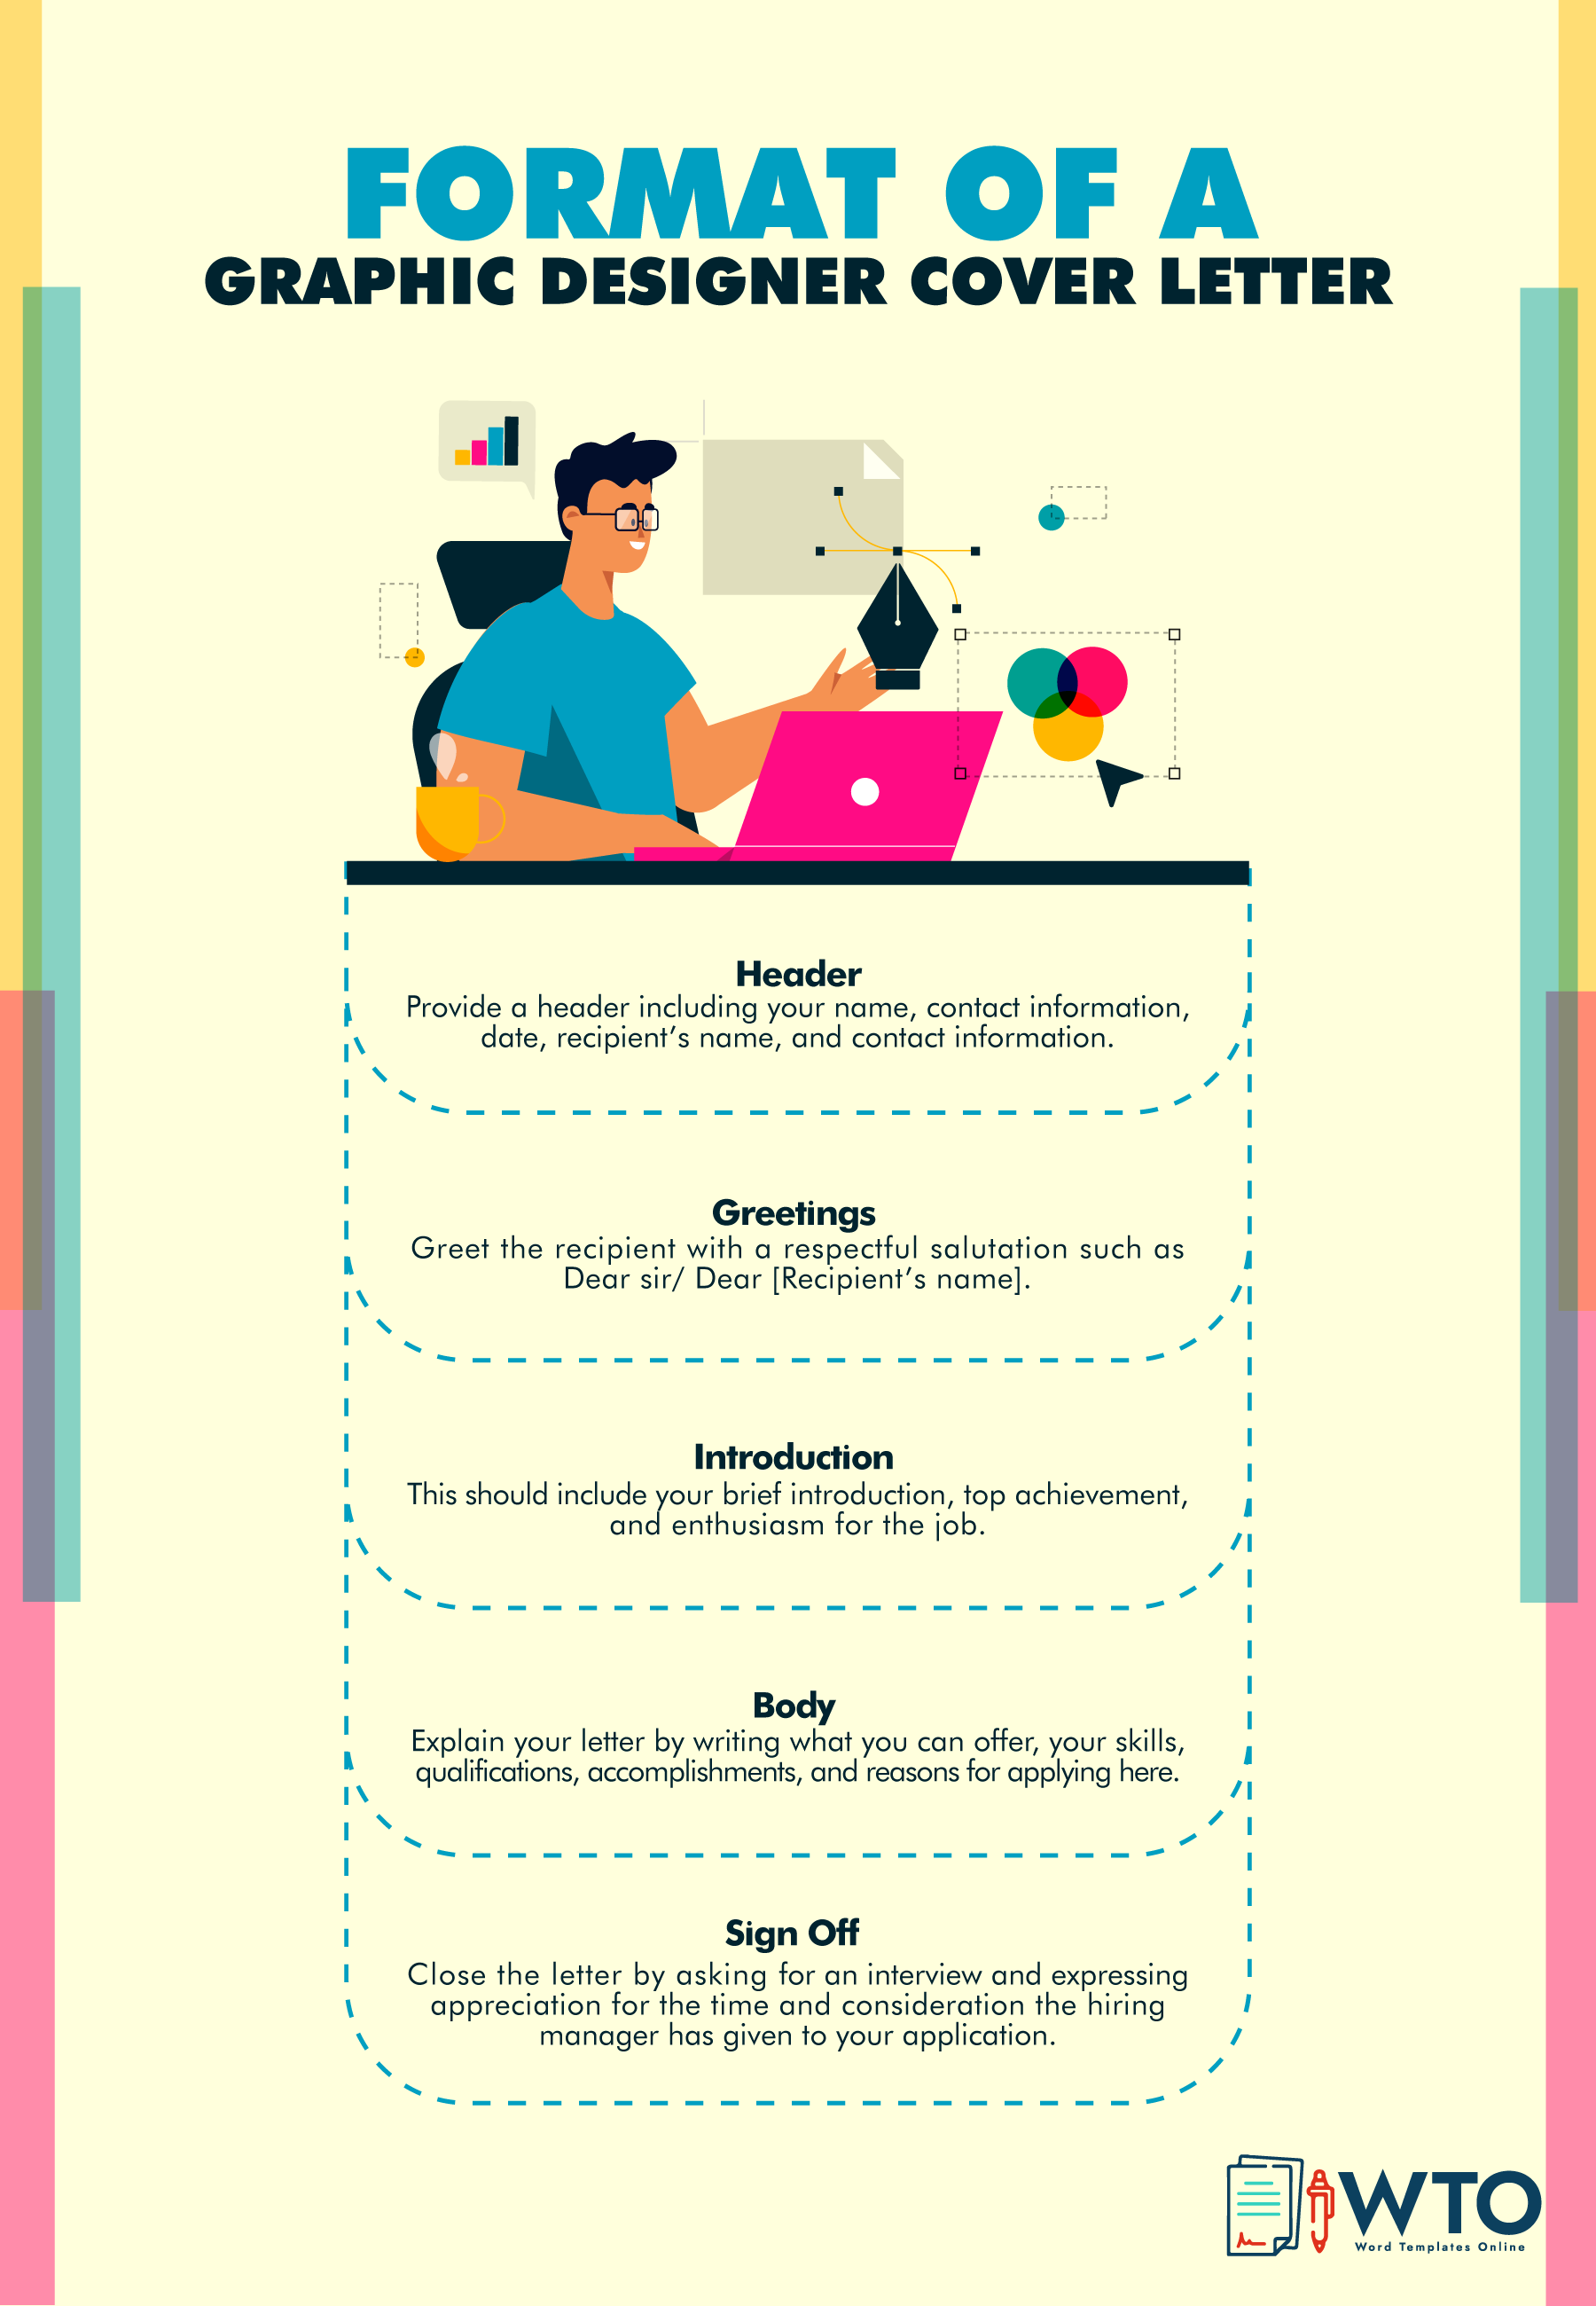 This infographic is about the format of a Graphic Designer Cover letter.